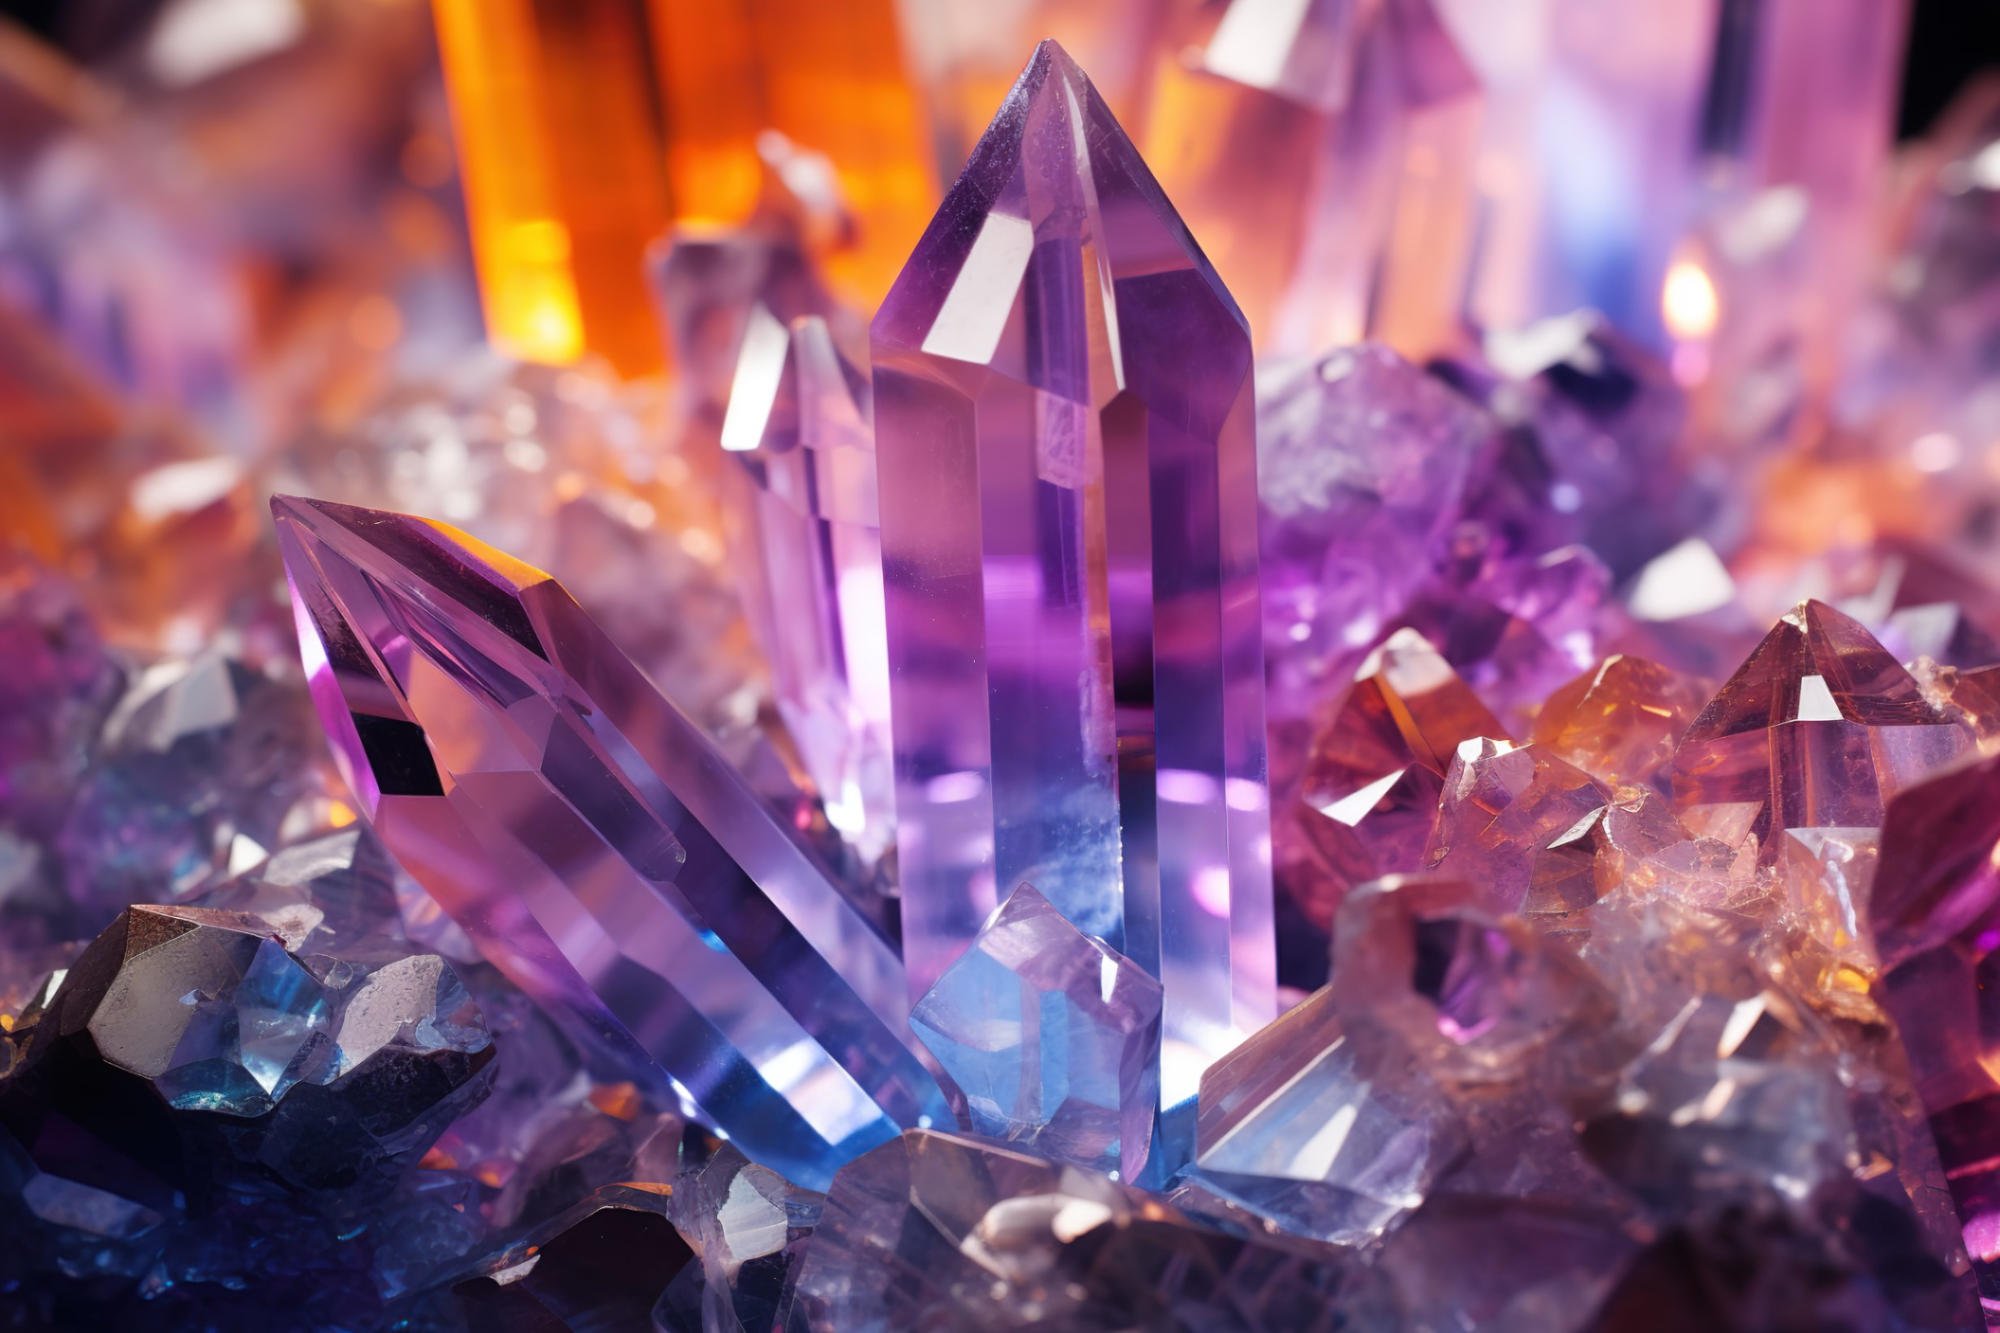 A new discovery transforms our understanding of crystals